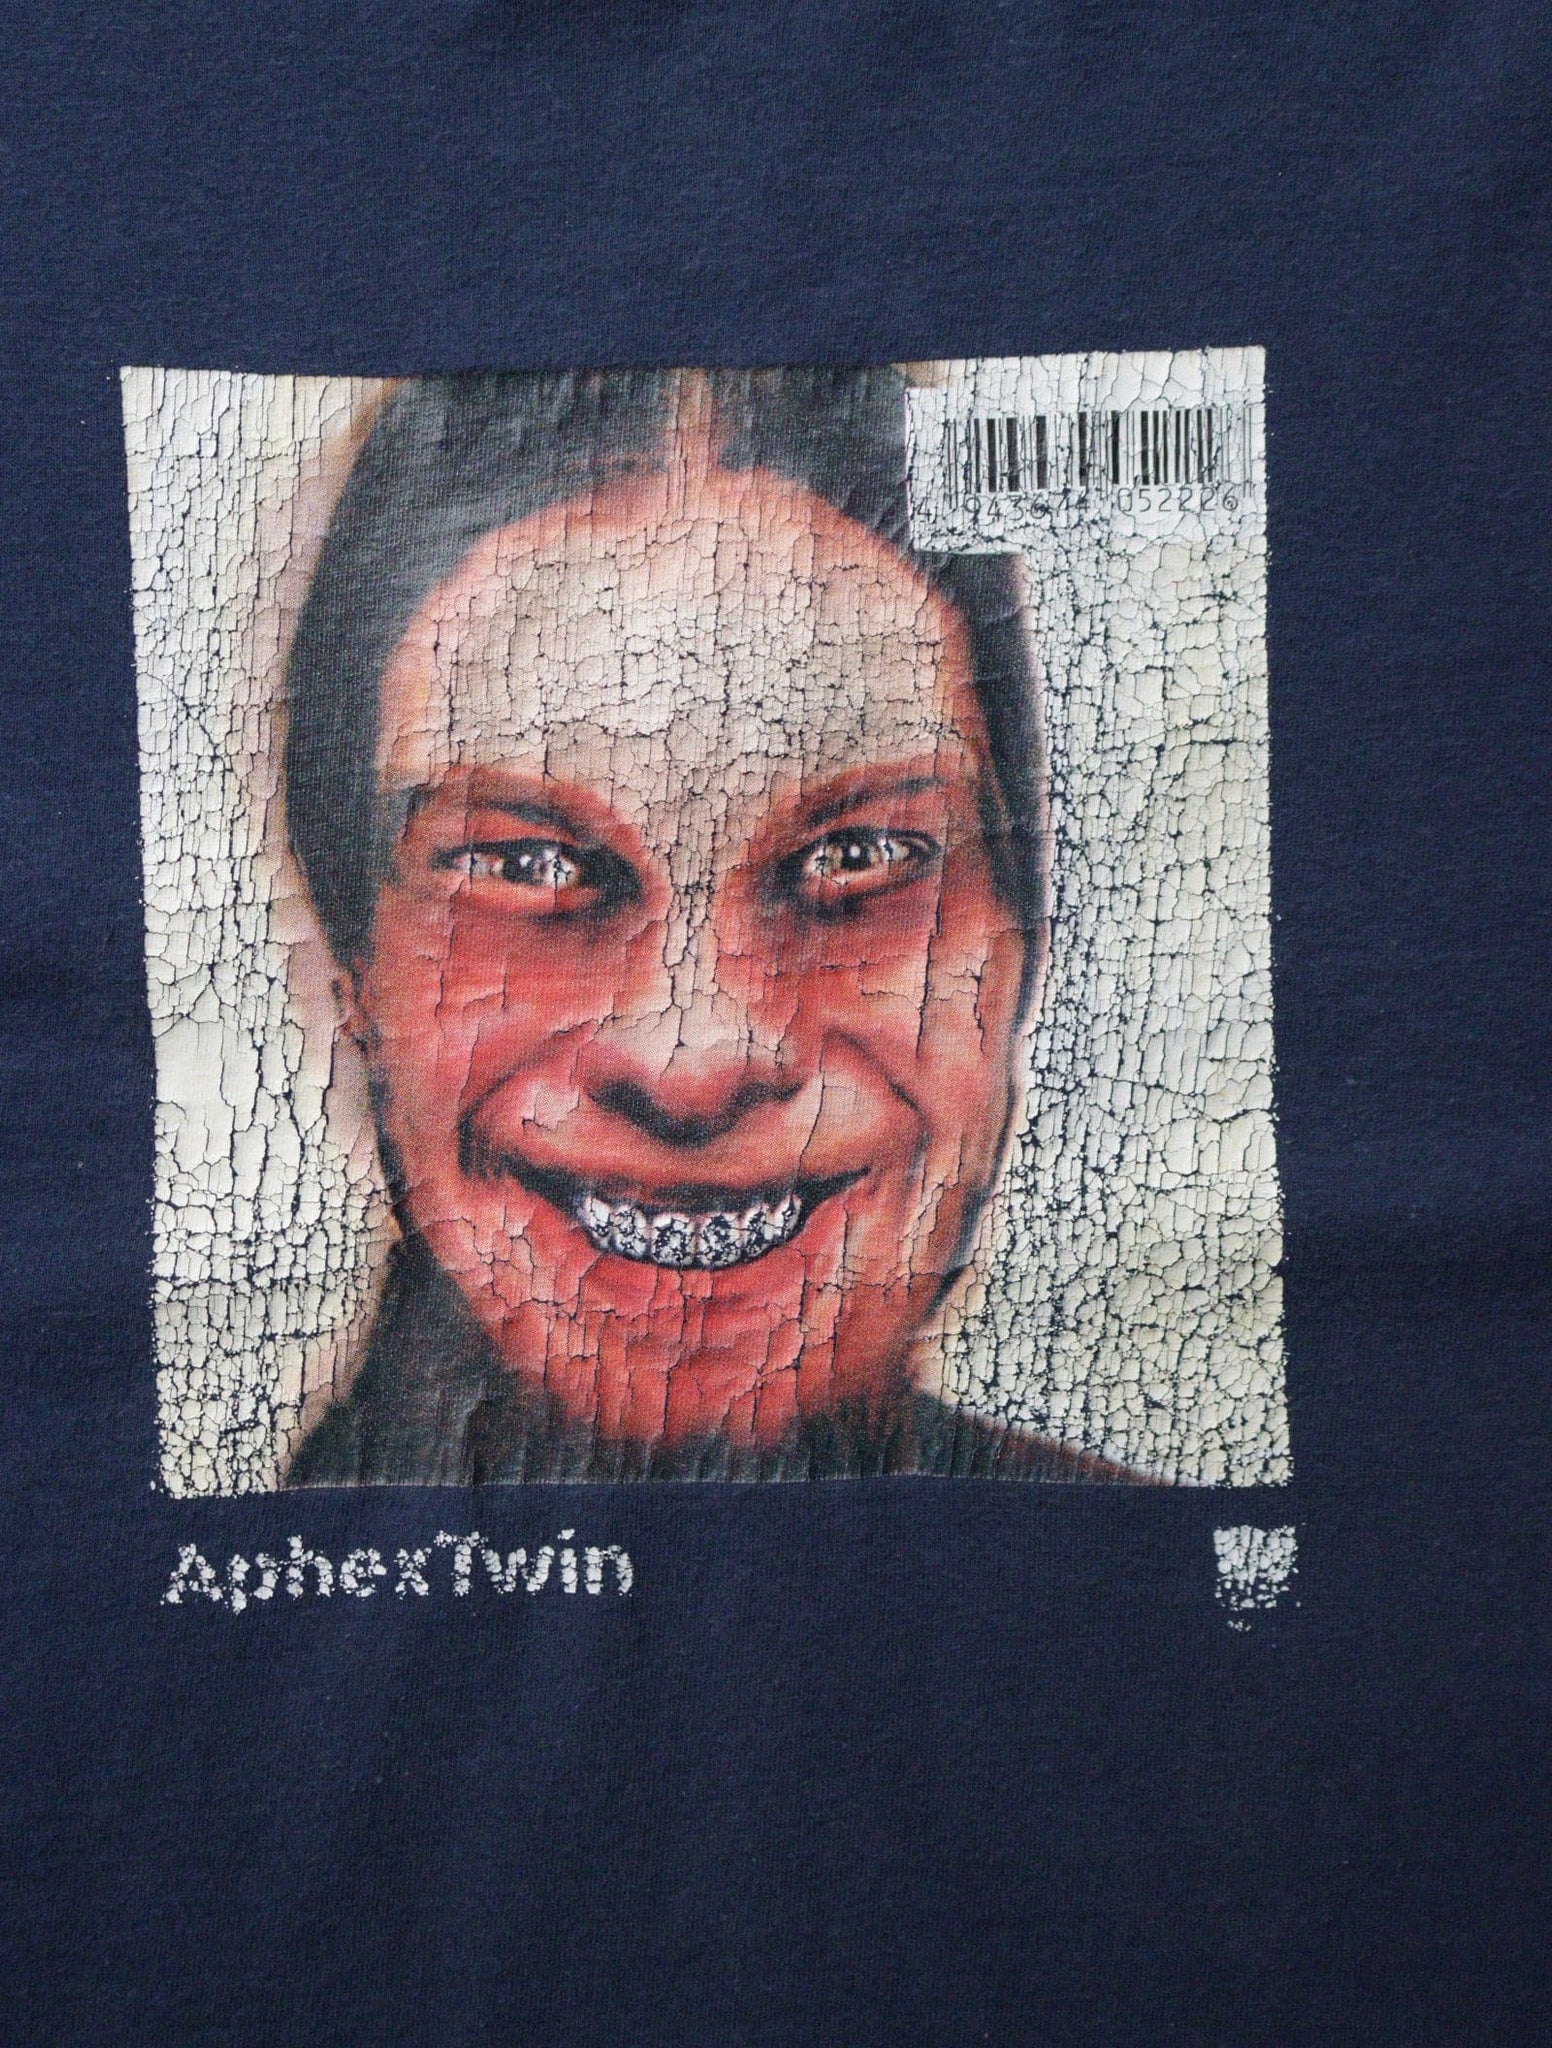 1995 APHEX TWIN '...I CARE BECAUSE YOU DO' FADED TEE